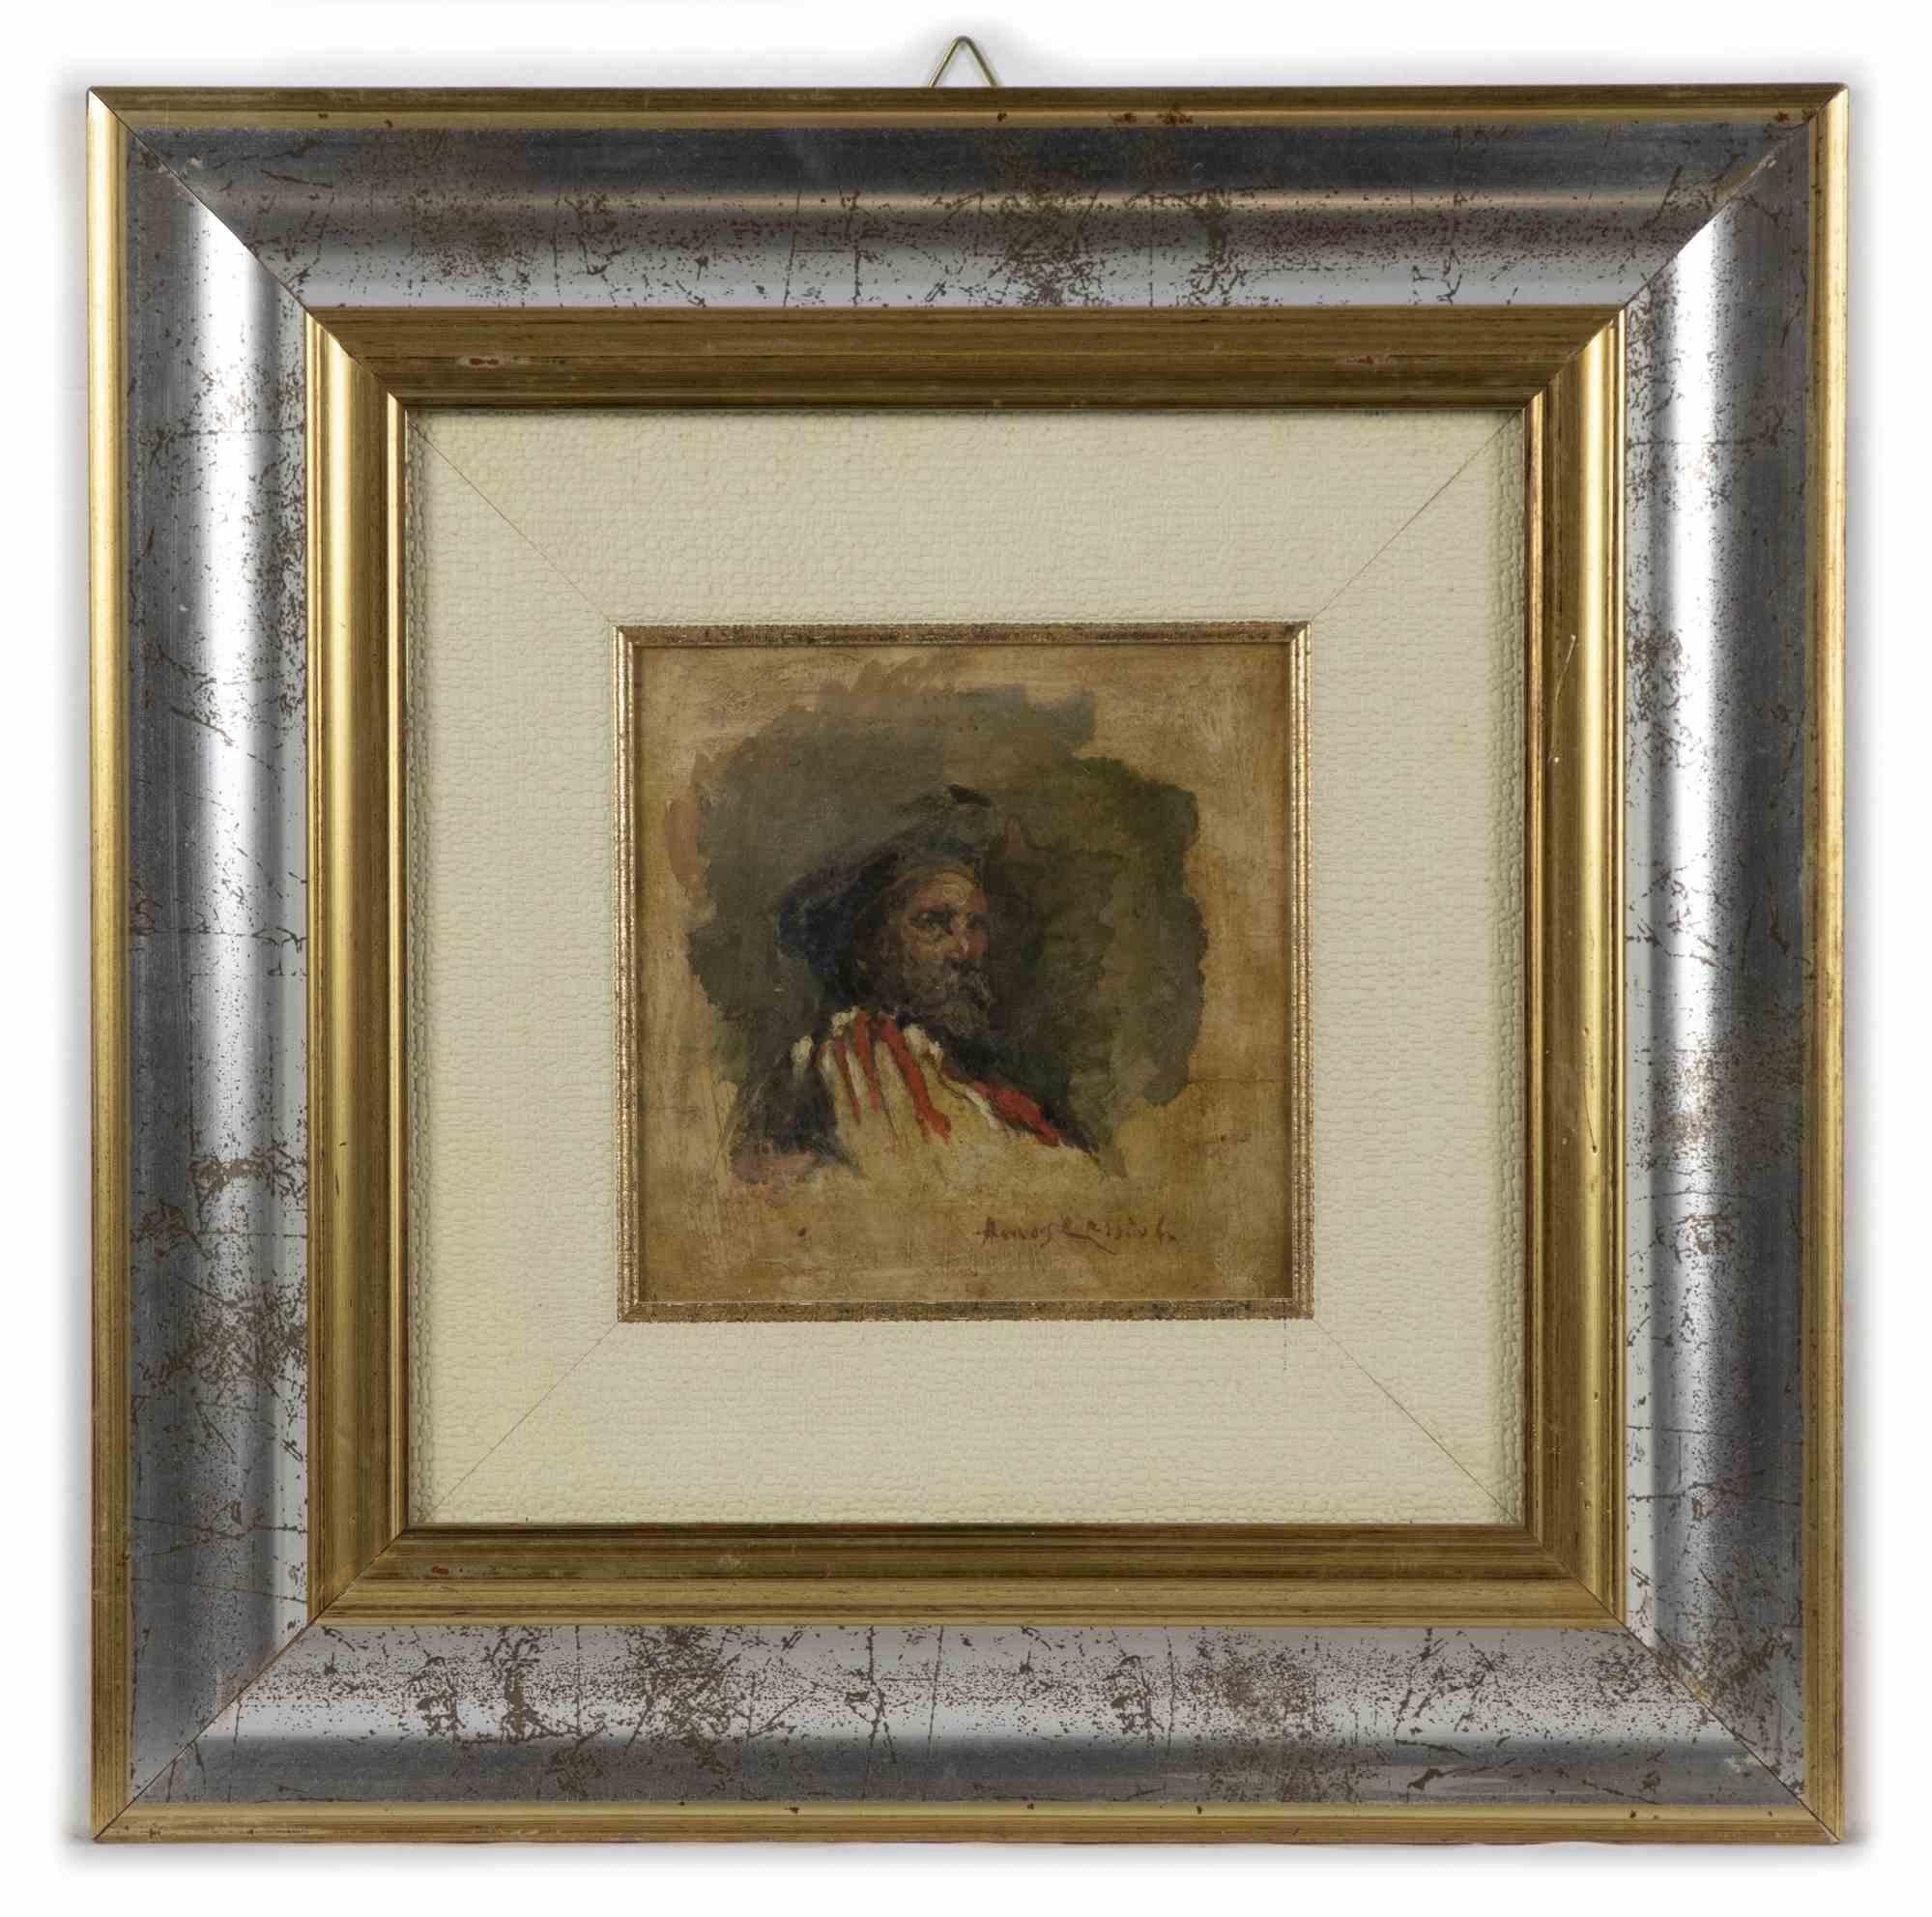 Portrait of Giuseppe Garibaldi is an original old master artwork realized by Amos Cassioli (1832-1891) in 19th century.

Oil painting on panel.

Hand signed on the lower right margin.

Includes frame: 38.5 x 38.5 cm